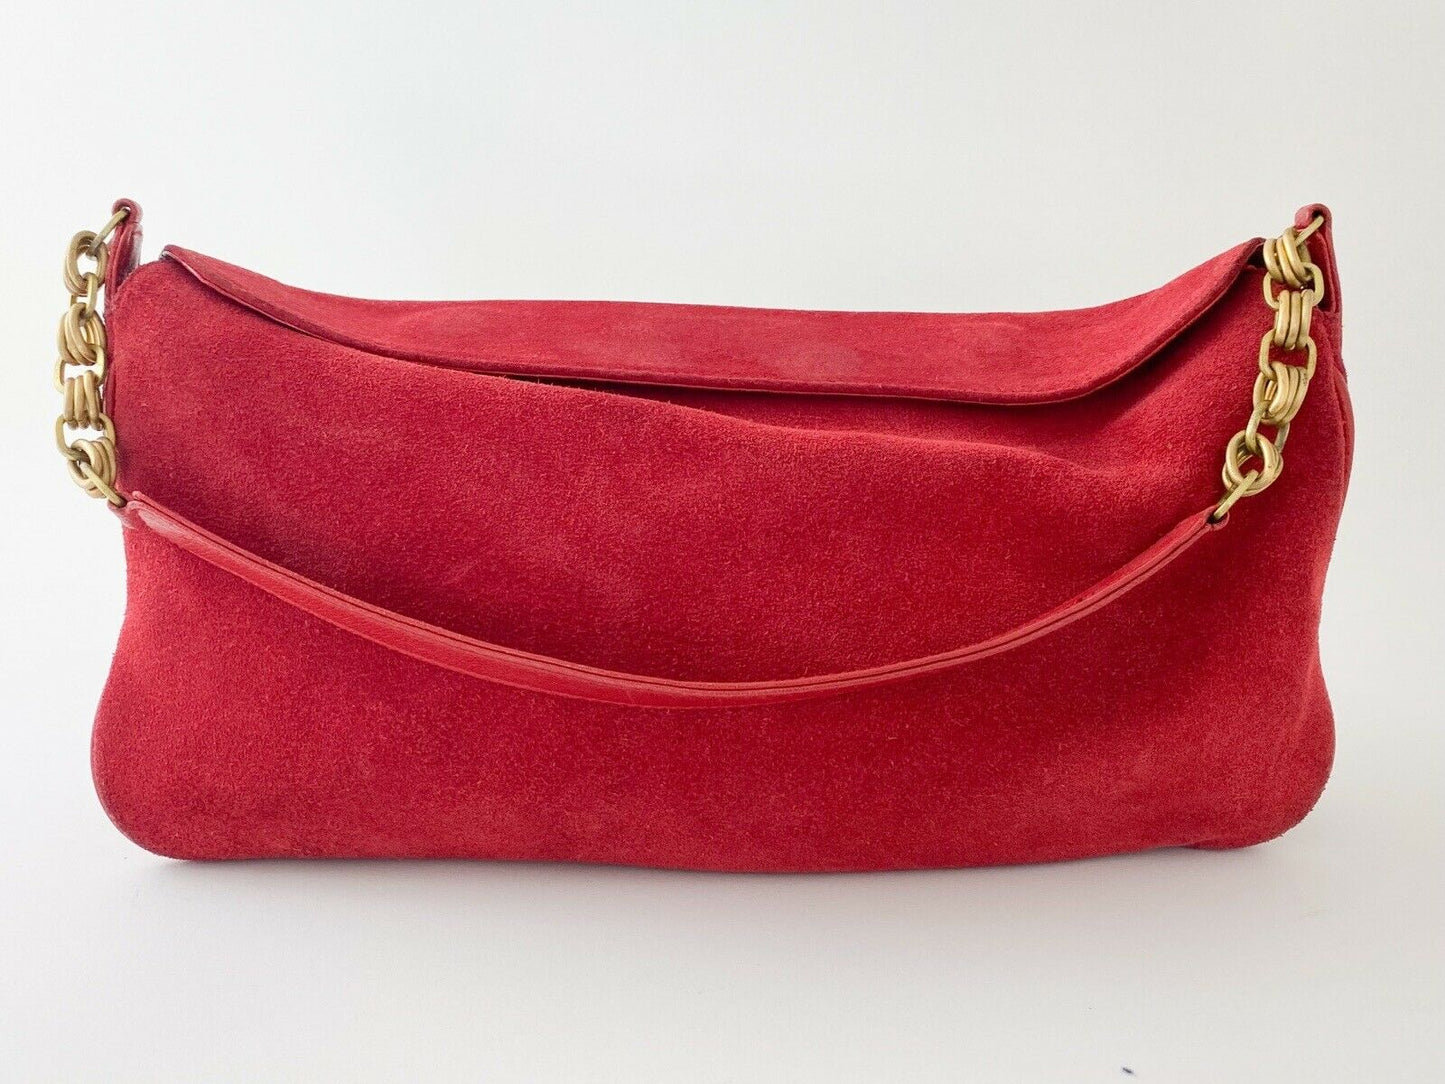 【SOLD OUT】NINA RICCI Red Suede Leather Shoulder Bag Handbag Made in Italy